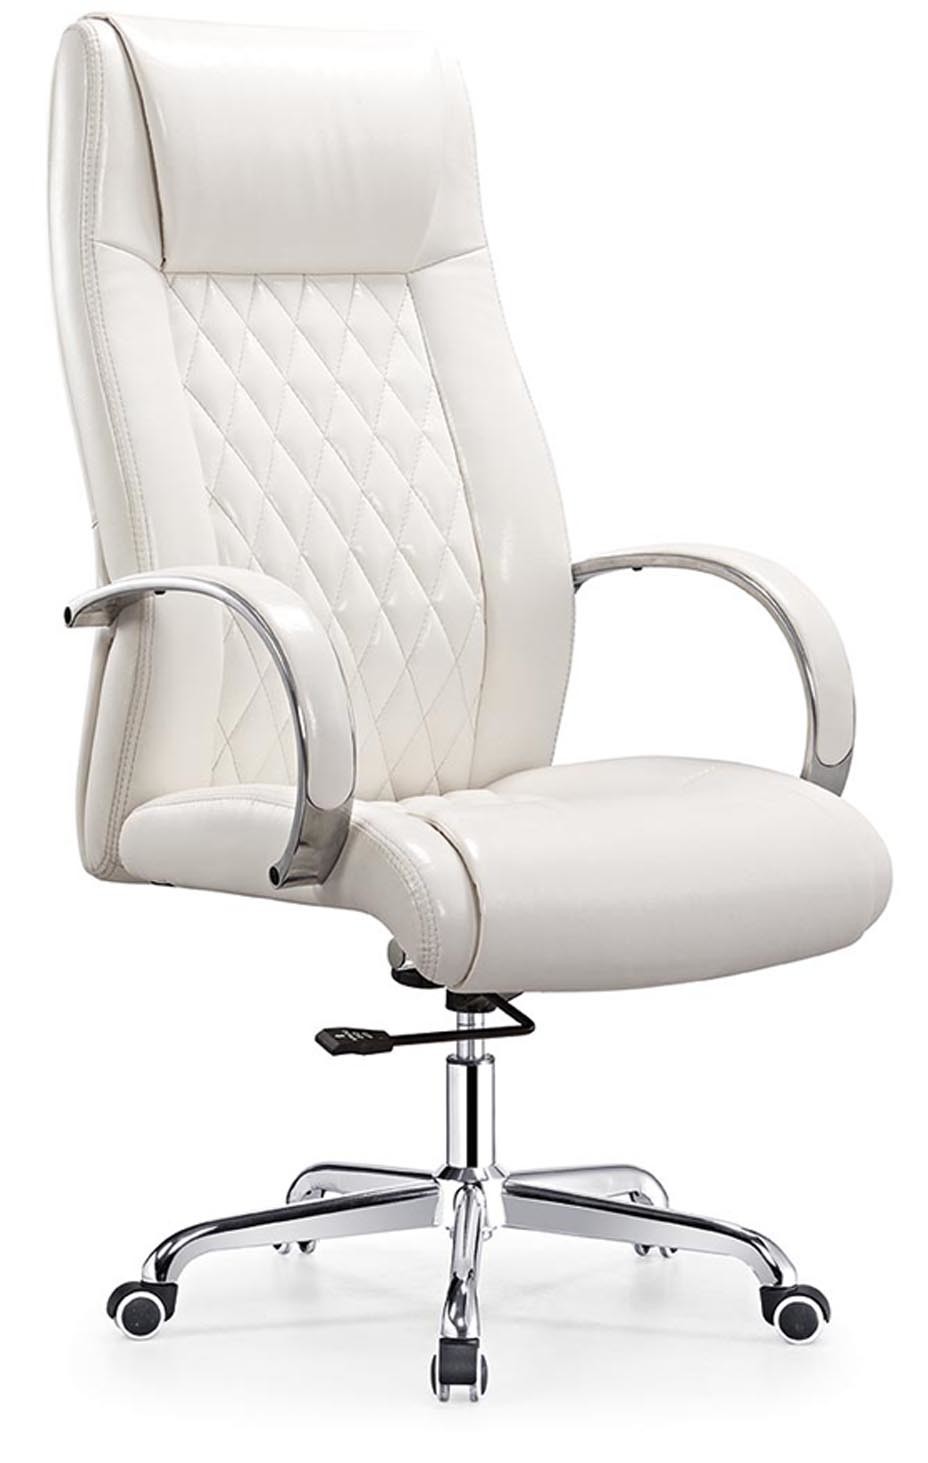 Modern Hot Sale High Back Leather Executive Boss Office Chair (HF-A1526)